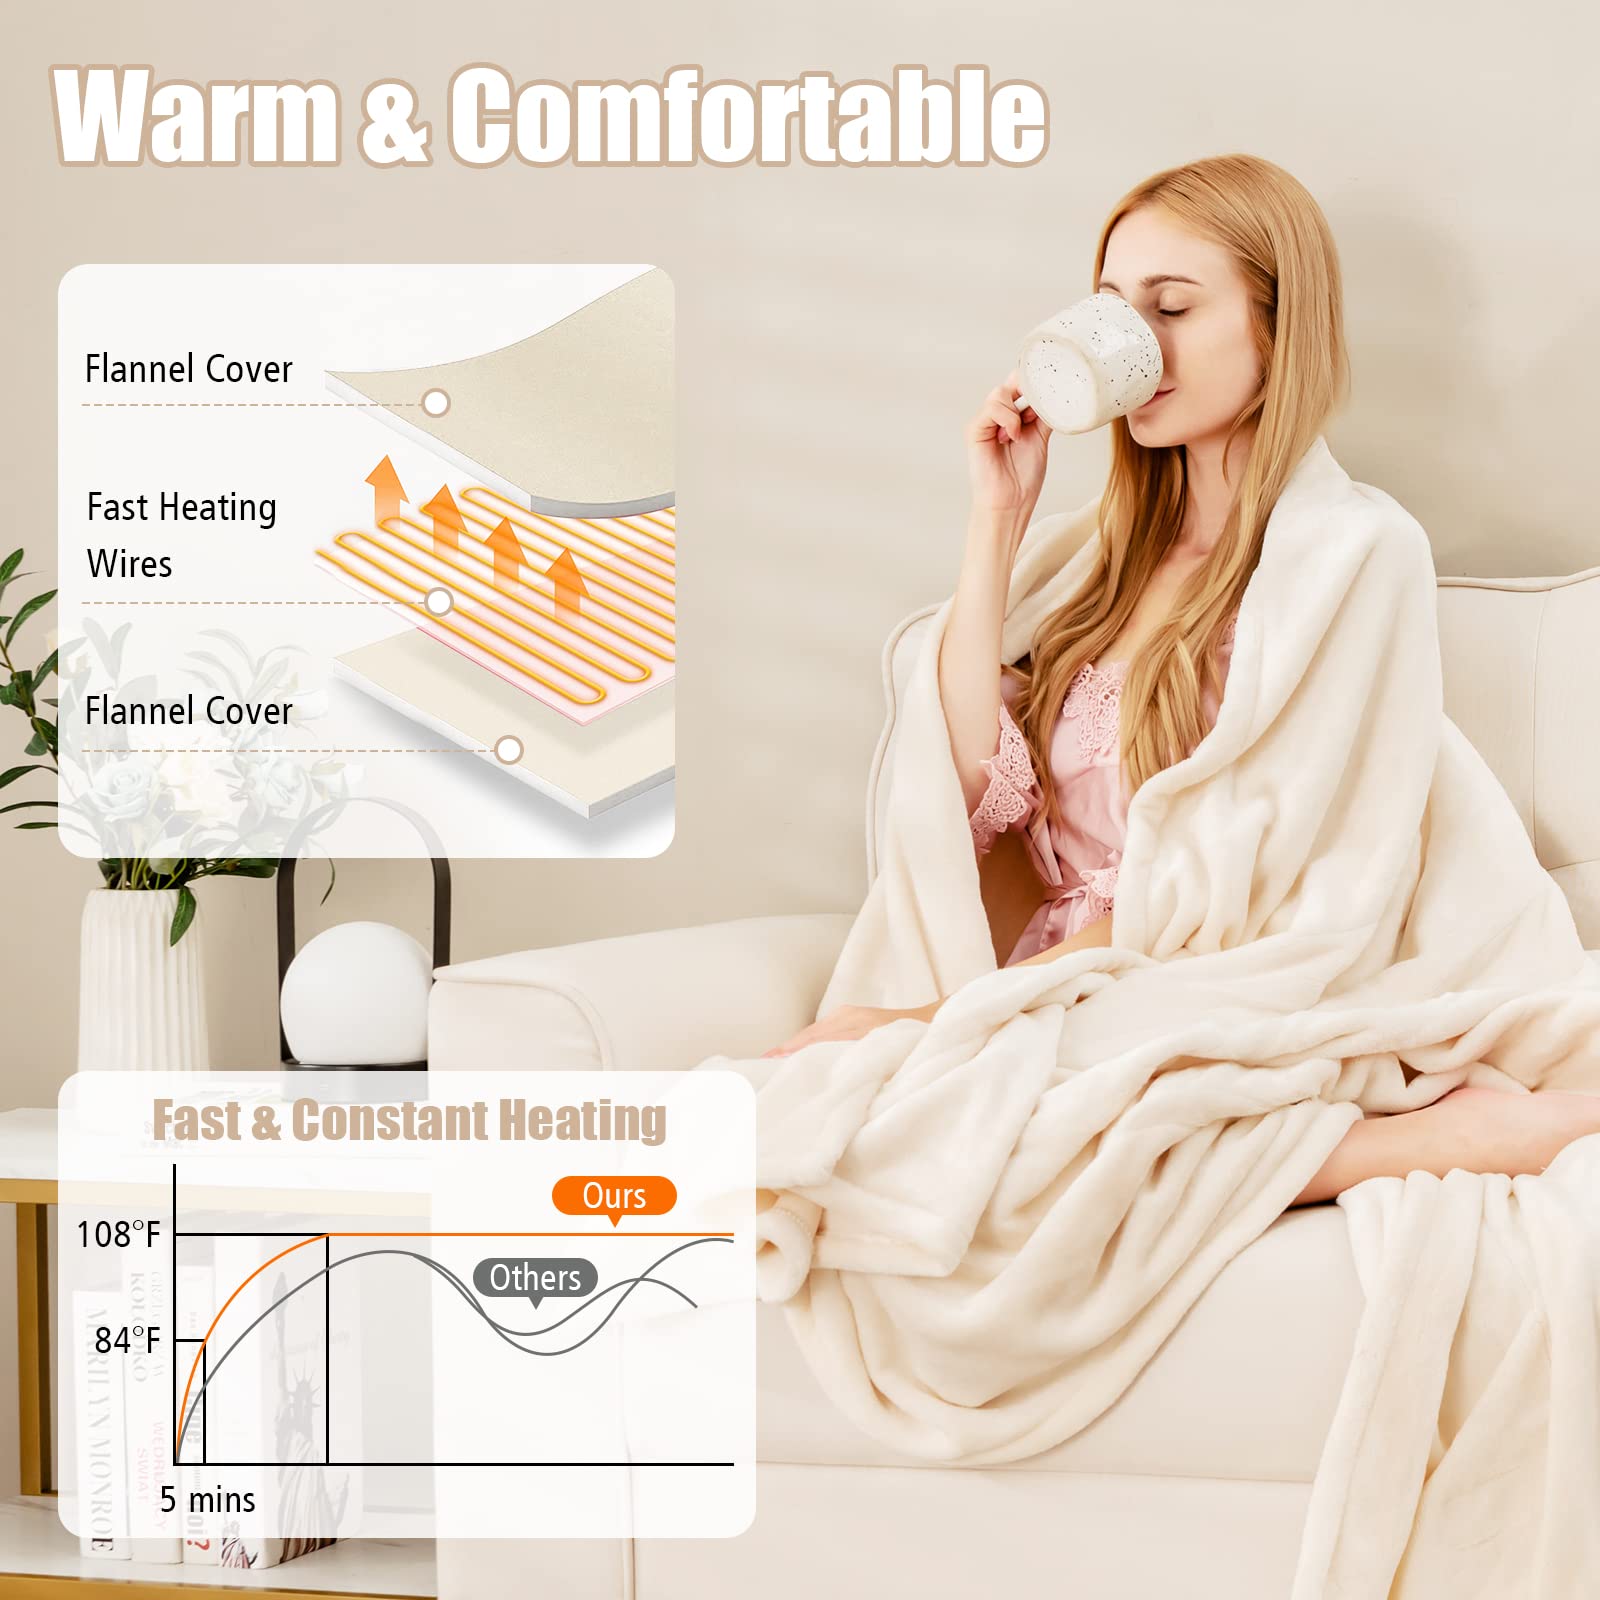 Versatile Twin Size for Every Need: Our electric blanket measures 62"x 84", perfect for a single person's use. Whether you need it as a shoulder wrap, leg warmer, or bed cover, this twin-size blanket is incredibly versatile. It's also a thoughtful gift for parents, grandparents, loved ones, or friends.